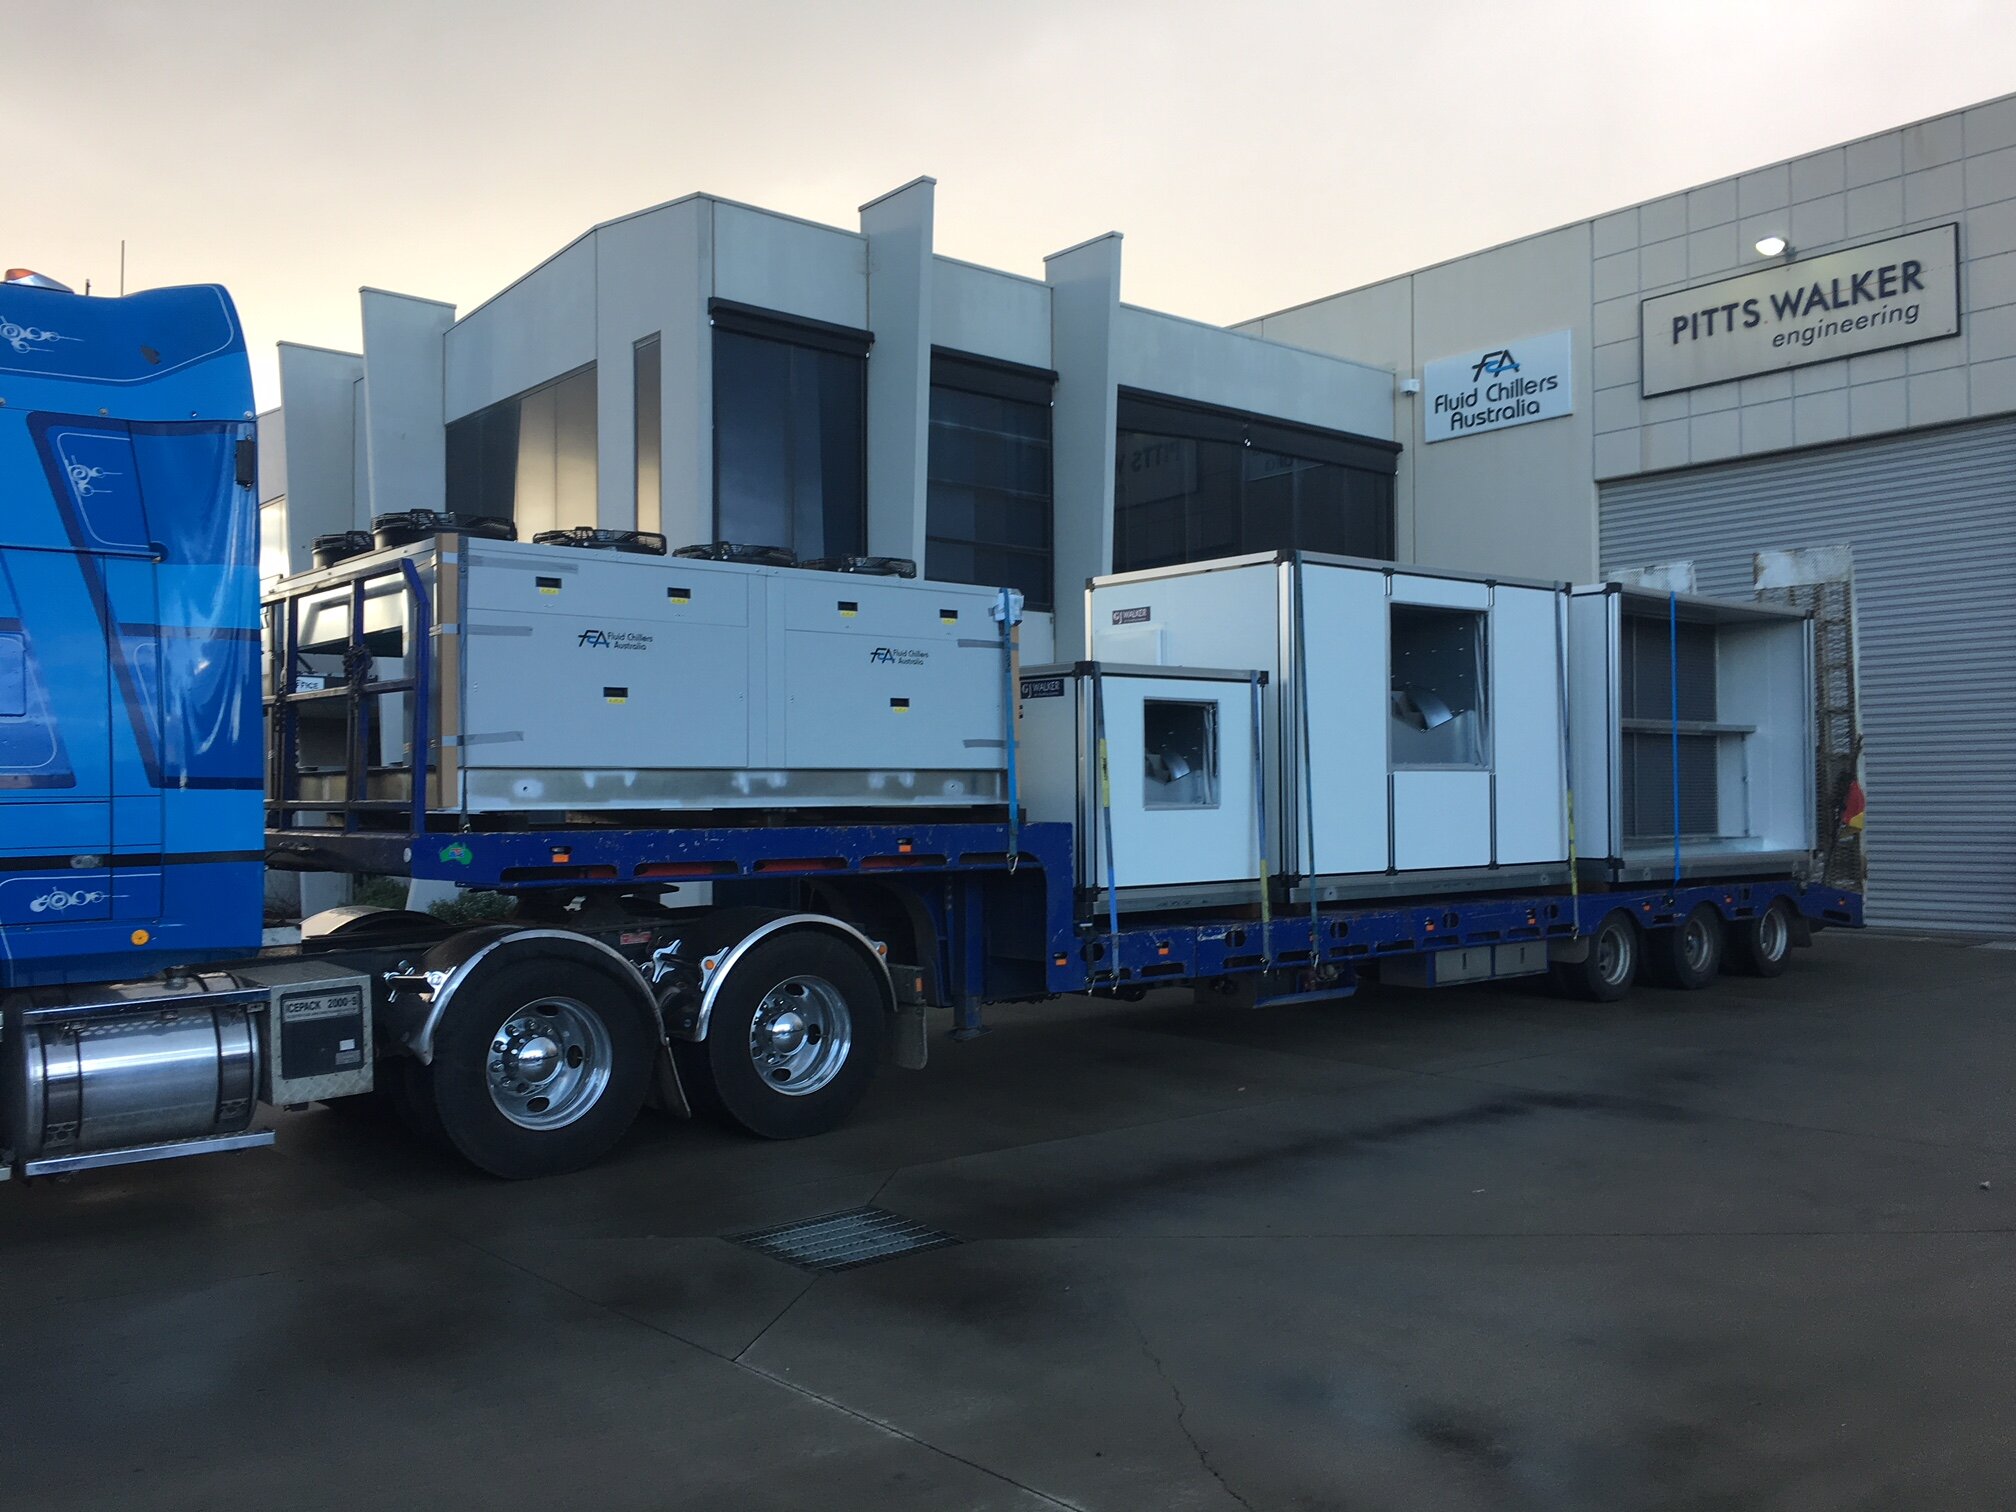 Project:
Food Processing plant chiller 

The Chiller Brief:
This client required a chiller and water source air handling unit to cool down their food processing plant

The Turnkey Solution:
We designed and manufactured the process water chiller &amp;